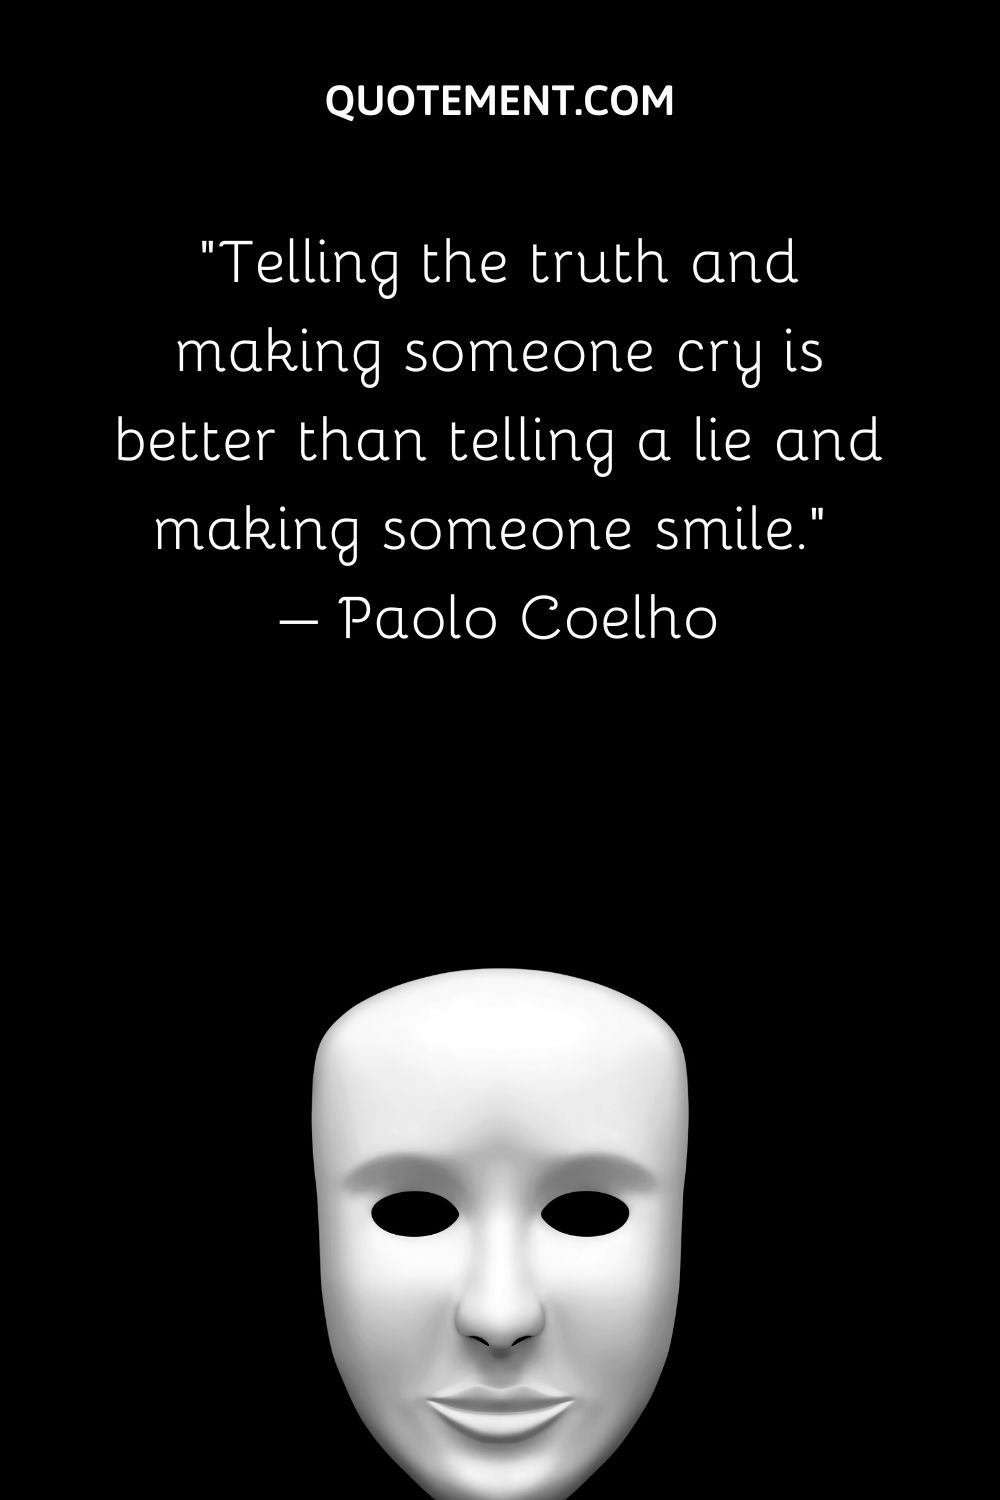 Telling the truth and making someone cry is better than telling a lie and making someone smile.